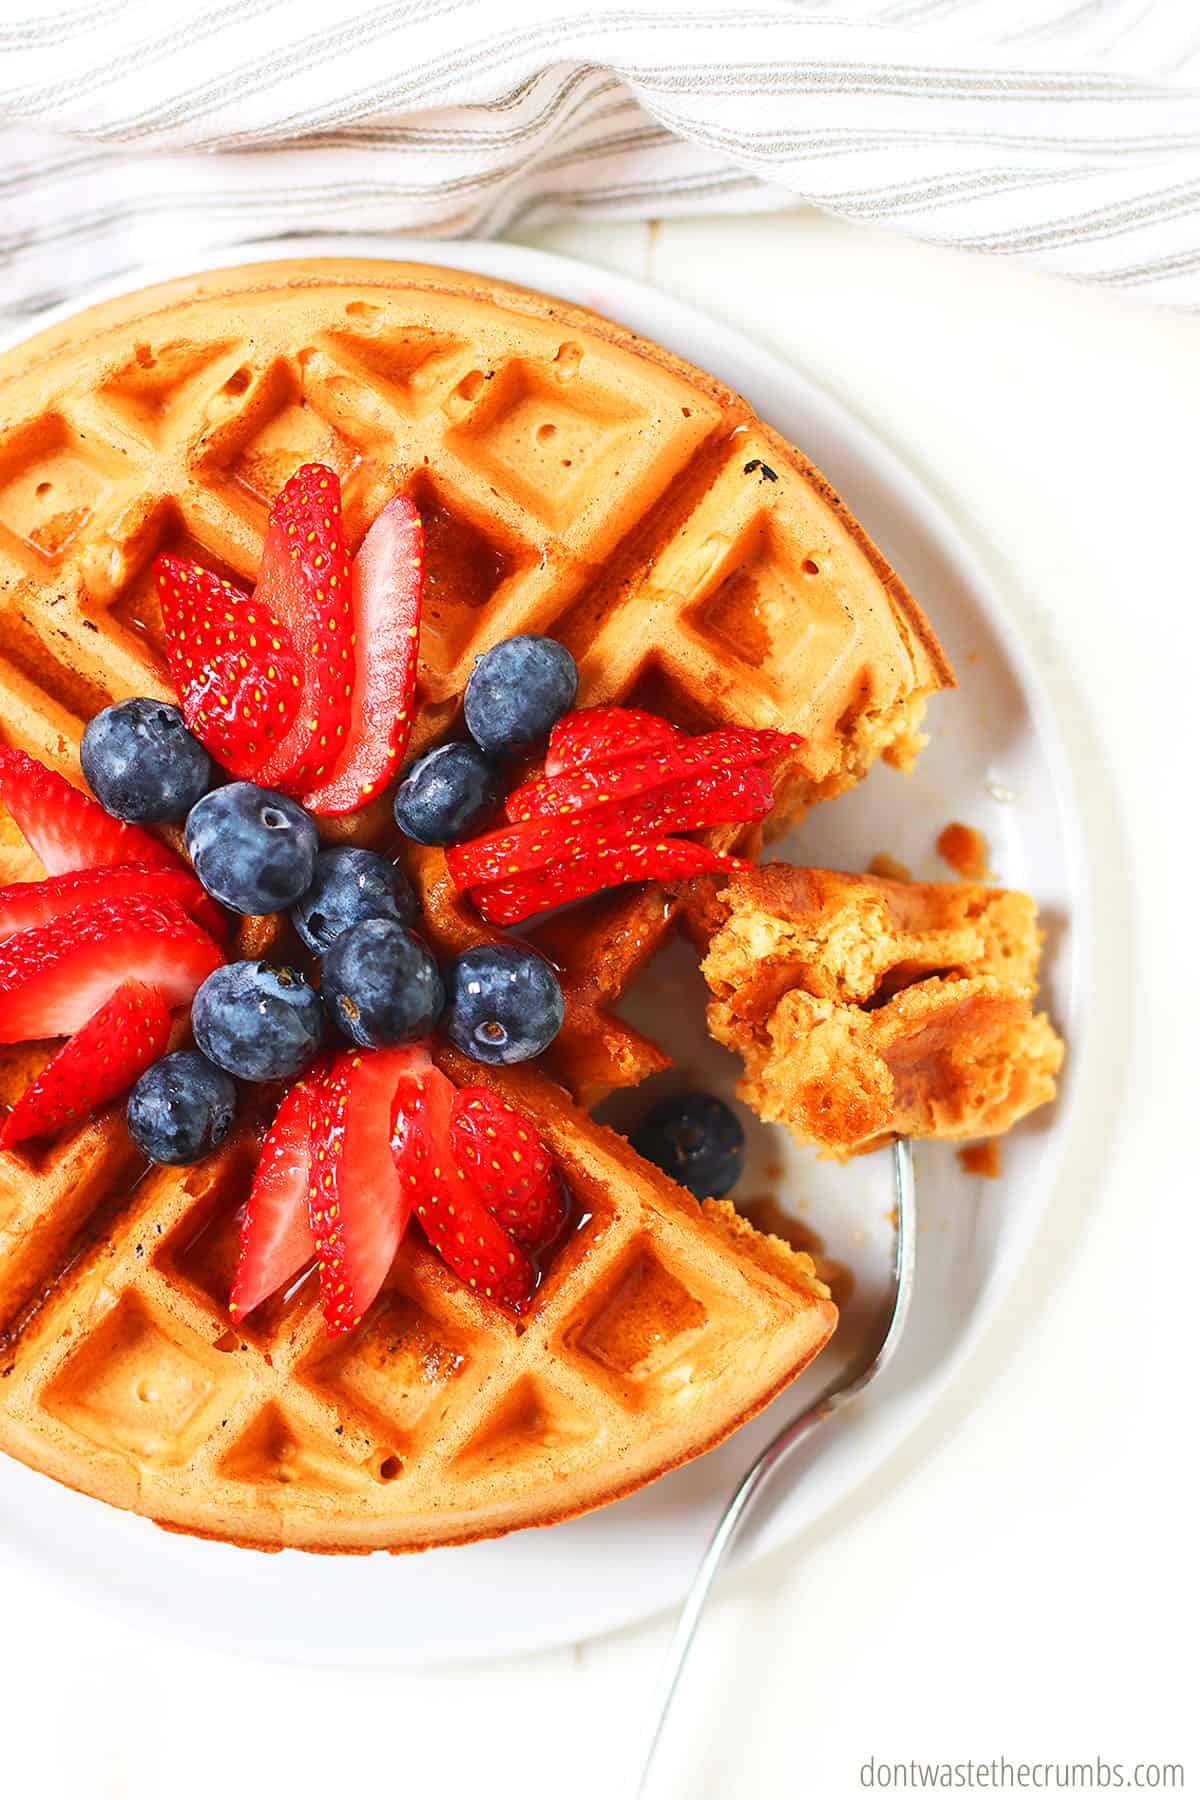 Fresh sourdough waffles with a topping of blueberries and cut strawberries on top. There is a bite taken from the waffles. This delicious breakfast is on a white plate.